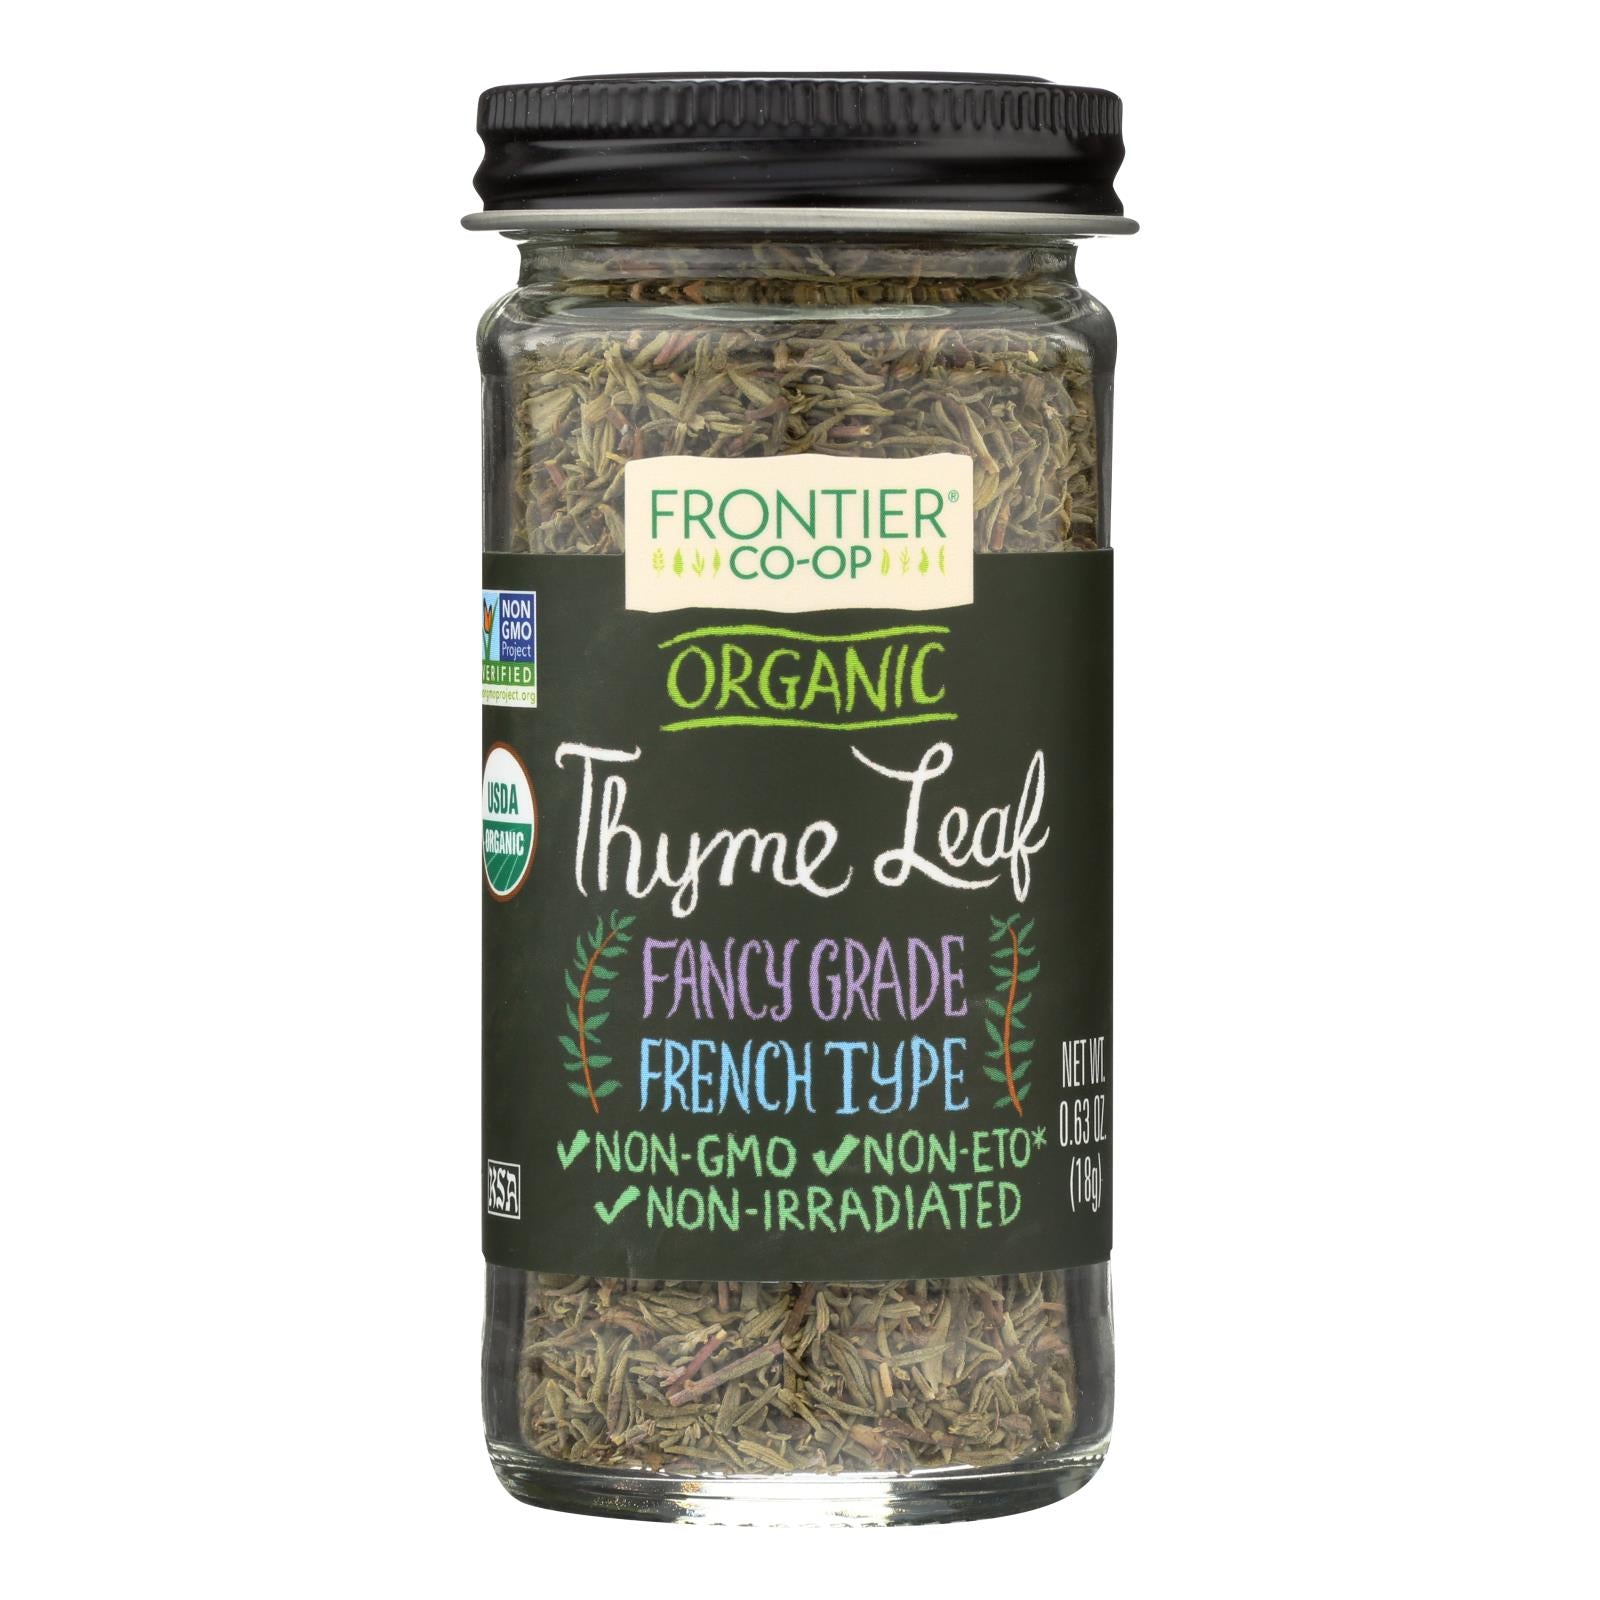 Frontier Herb Thyme Leaf - Organic - Whole - .8 Oz - Whole Green Foods